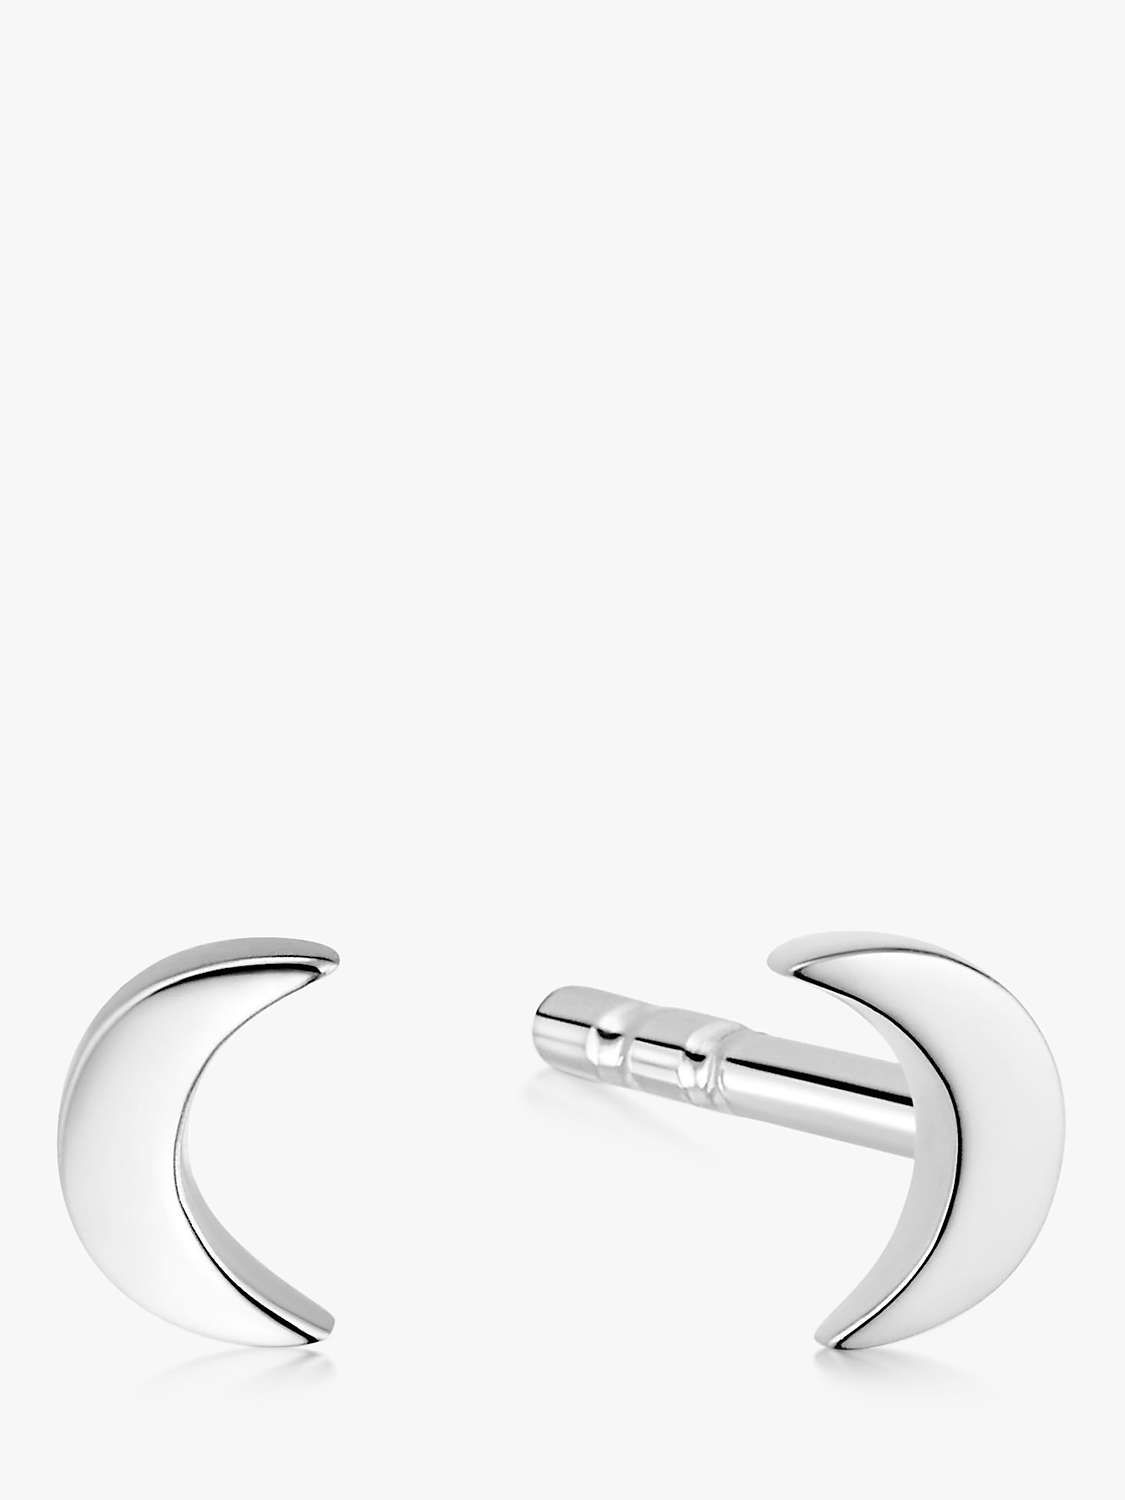 Buy Daisy London Crescent Moon Stud Earrings, Silver Online at johnlewis.com